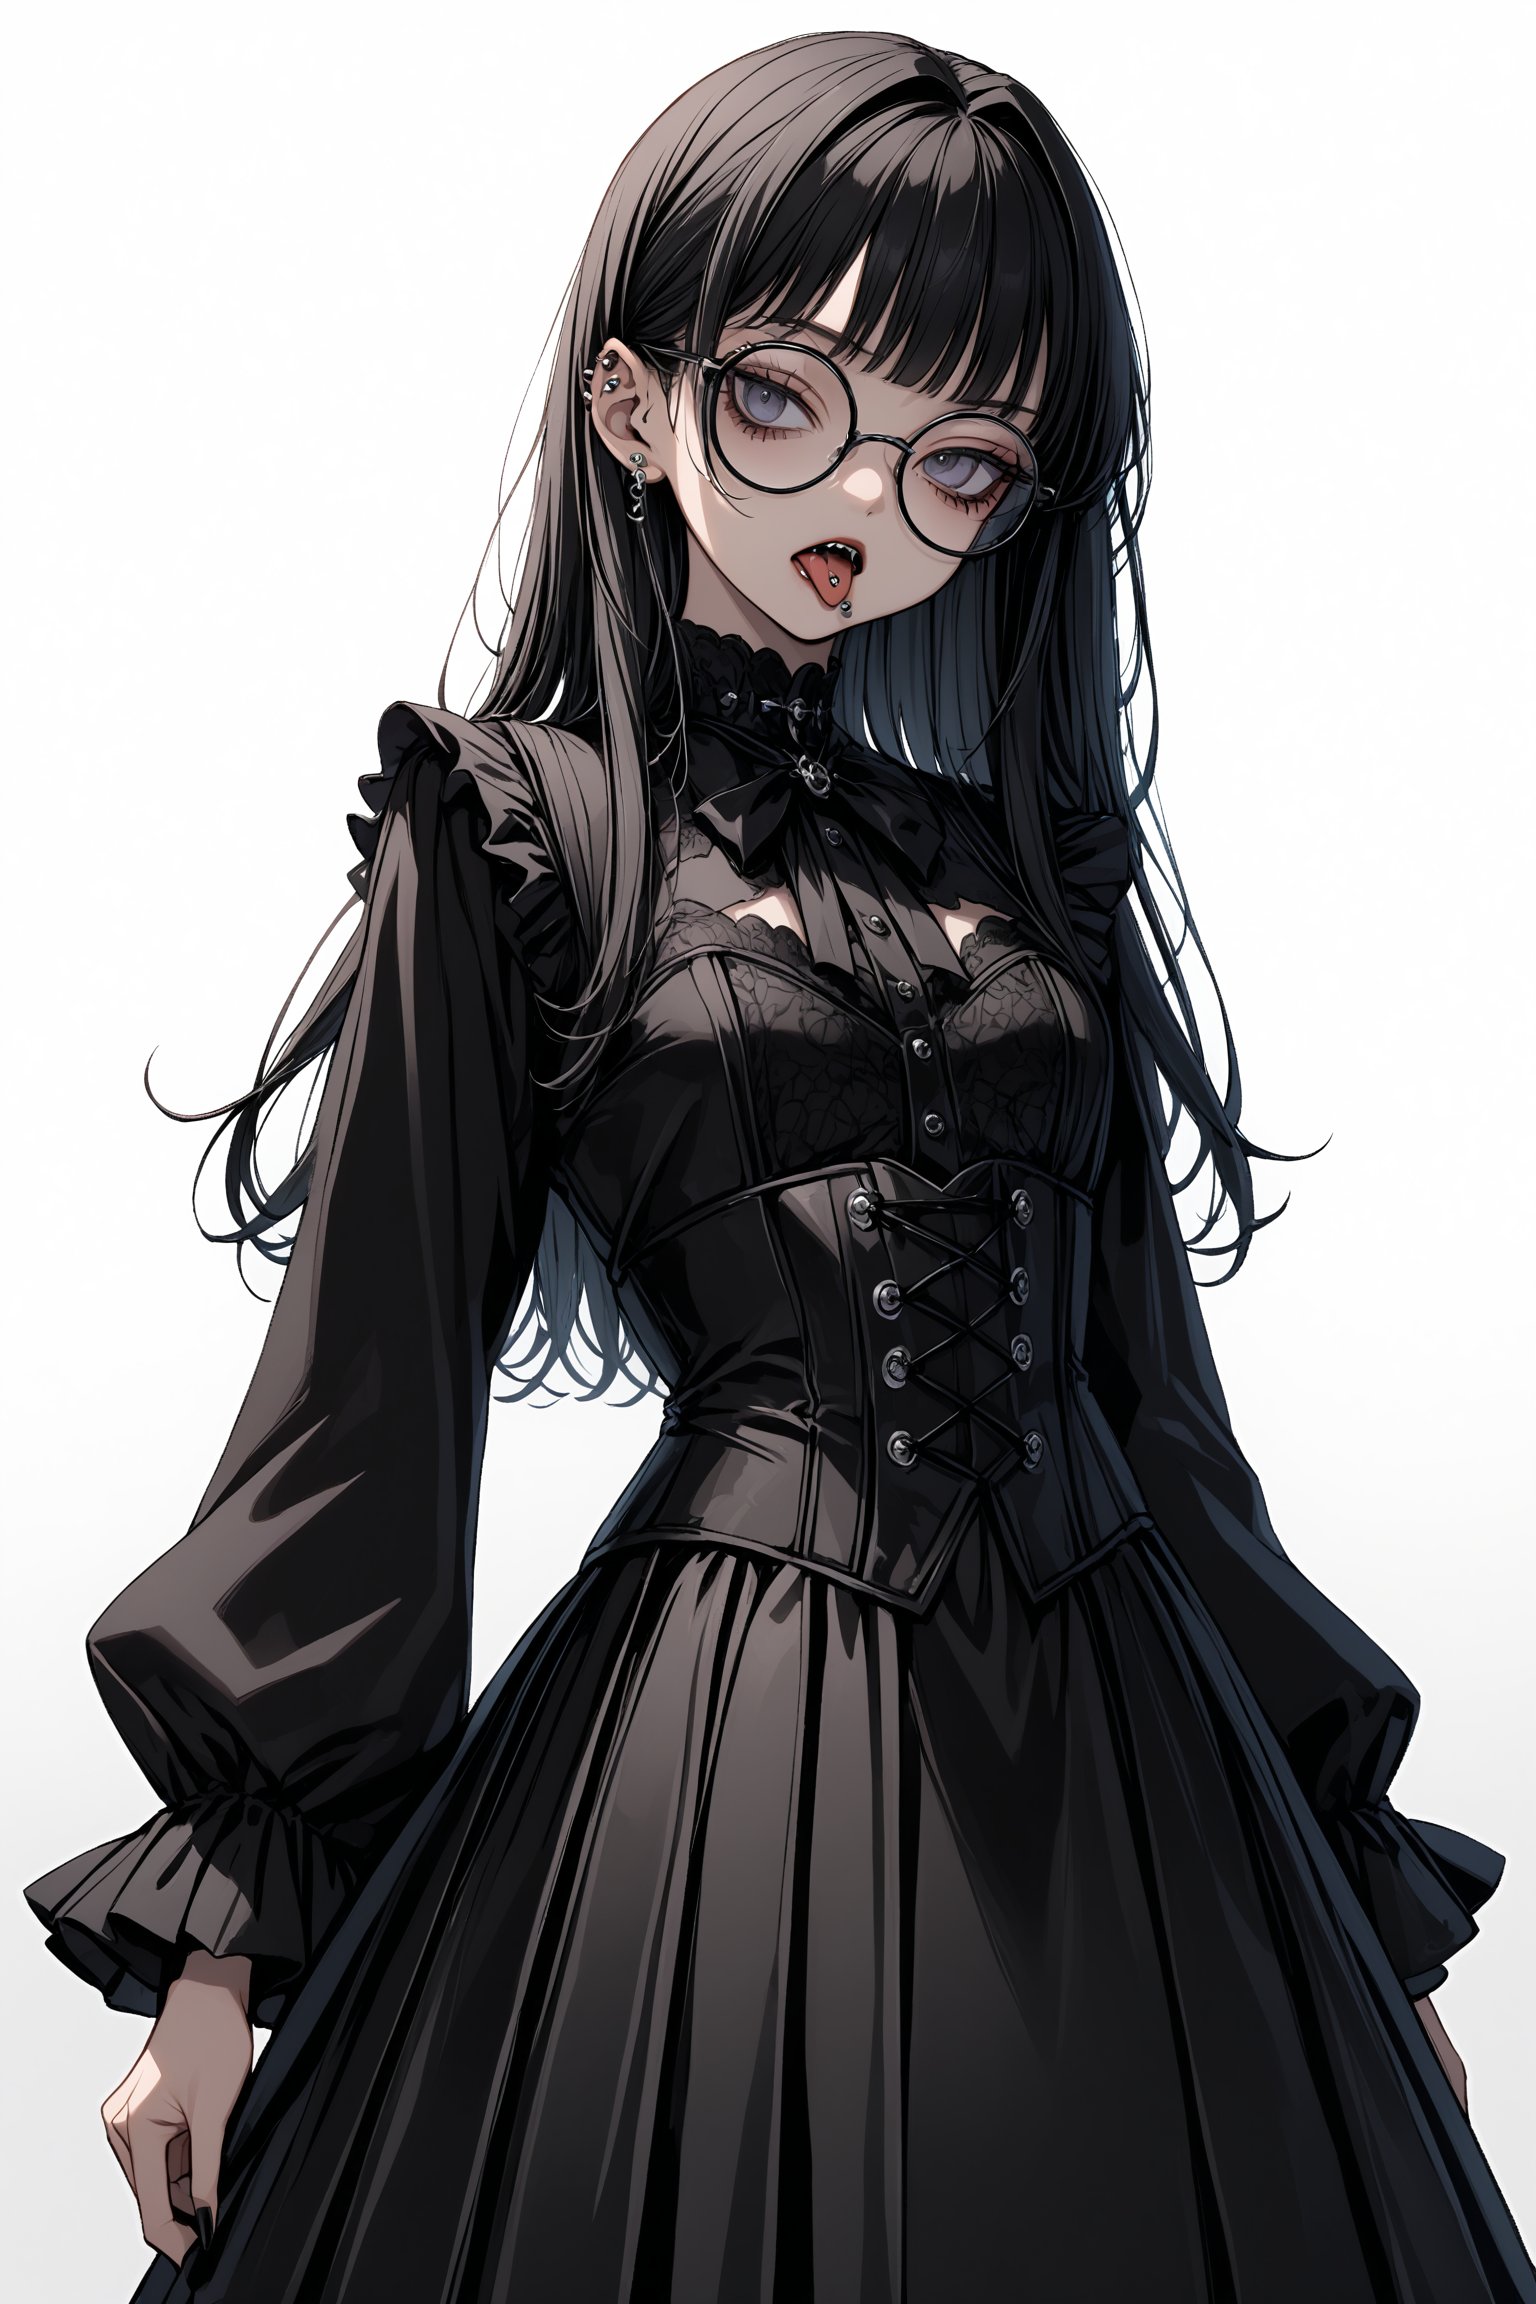 1 girl, black hair, hime cut,blunt bangs,(hair intakes),((tongue piercing)),
 ((wearing large round glasses)),dark eyeshadow, a Gothic-style sailor uniform,high school uniform,The uniform features dark colors, lace accents, and a corset-like bodice, blending traditional and alternative fashion elements,Her look is both elegant and edgy,akebi komichi,anime,goth girl